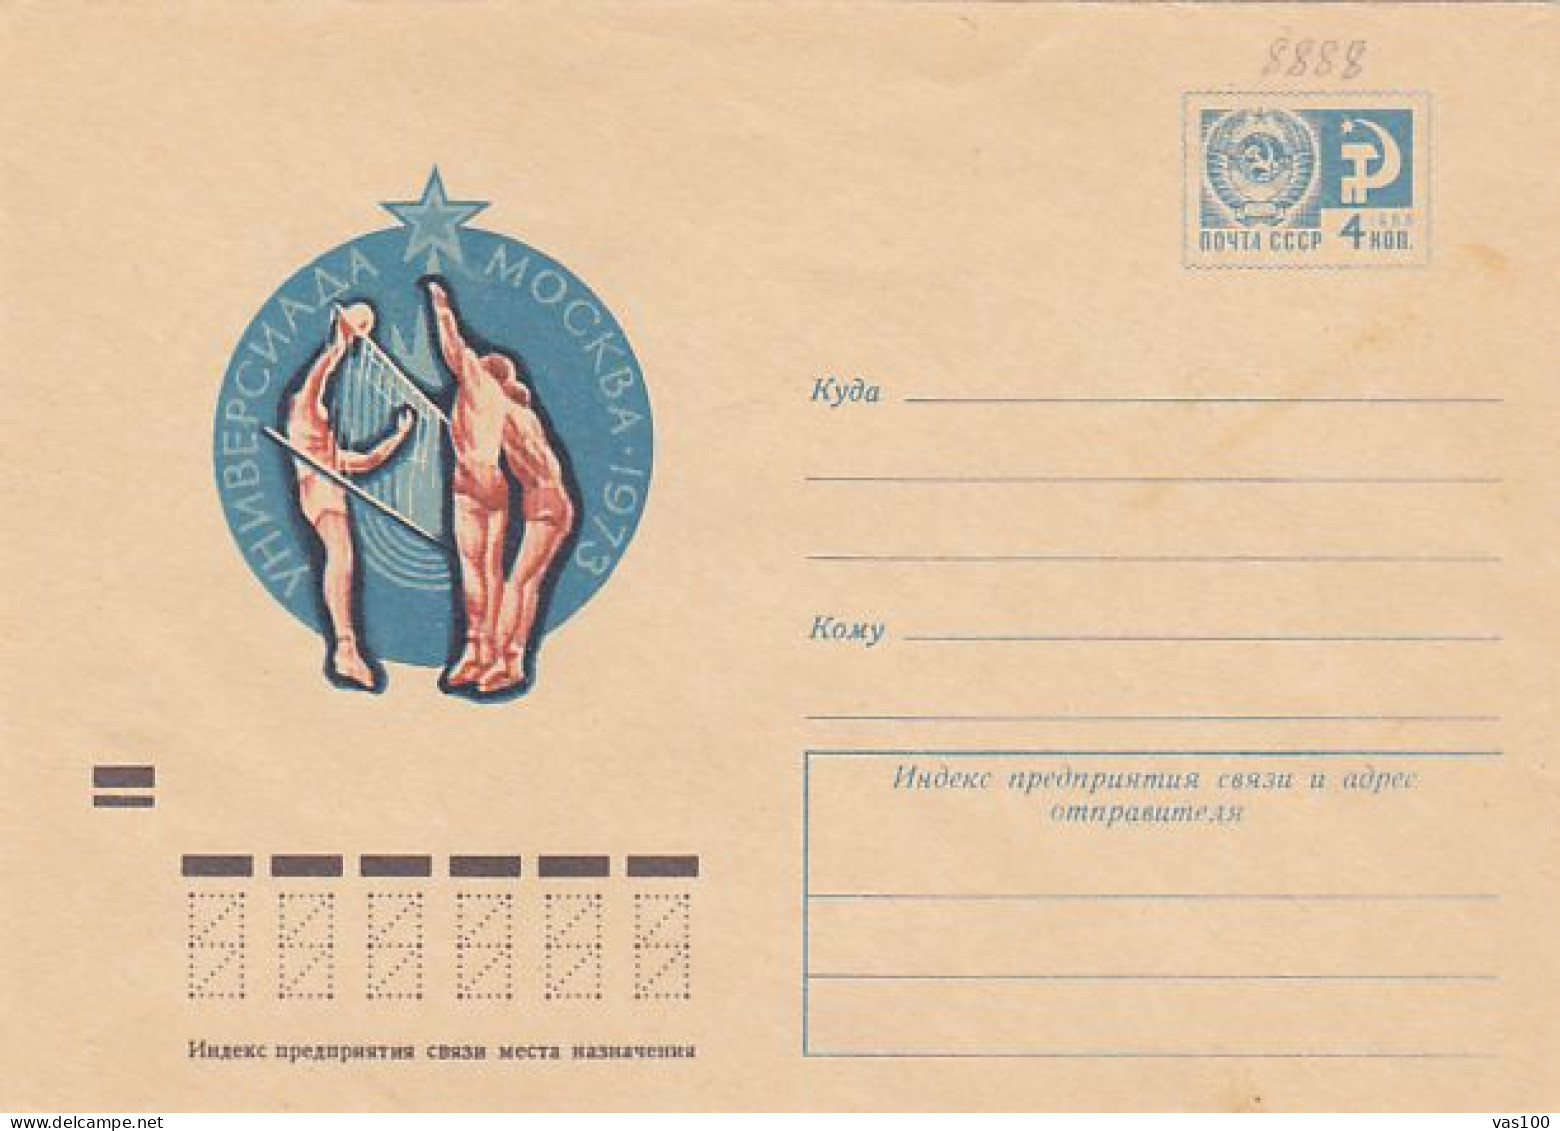 SPORTS, VOLLEYBALL, UNIVERSITY GAMES, COVER STATIONERY, ENTIER POSTAL, 1973, RUSSIA - Volleybal